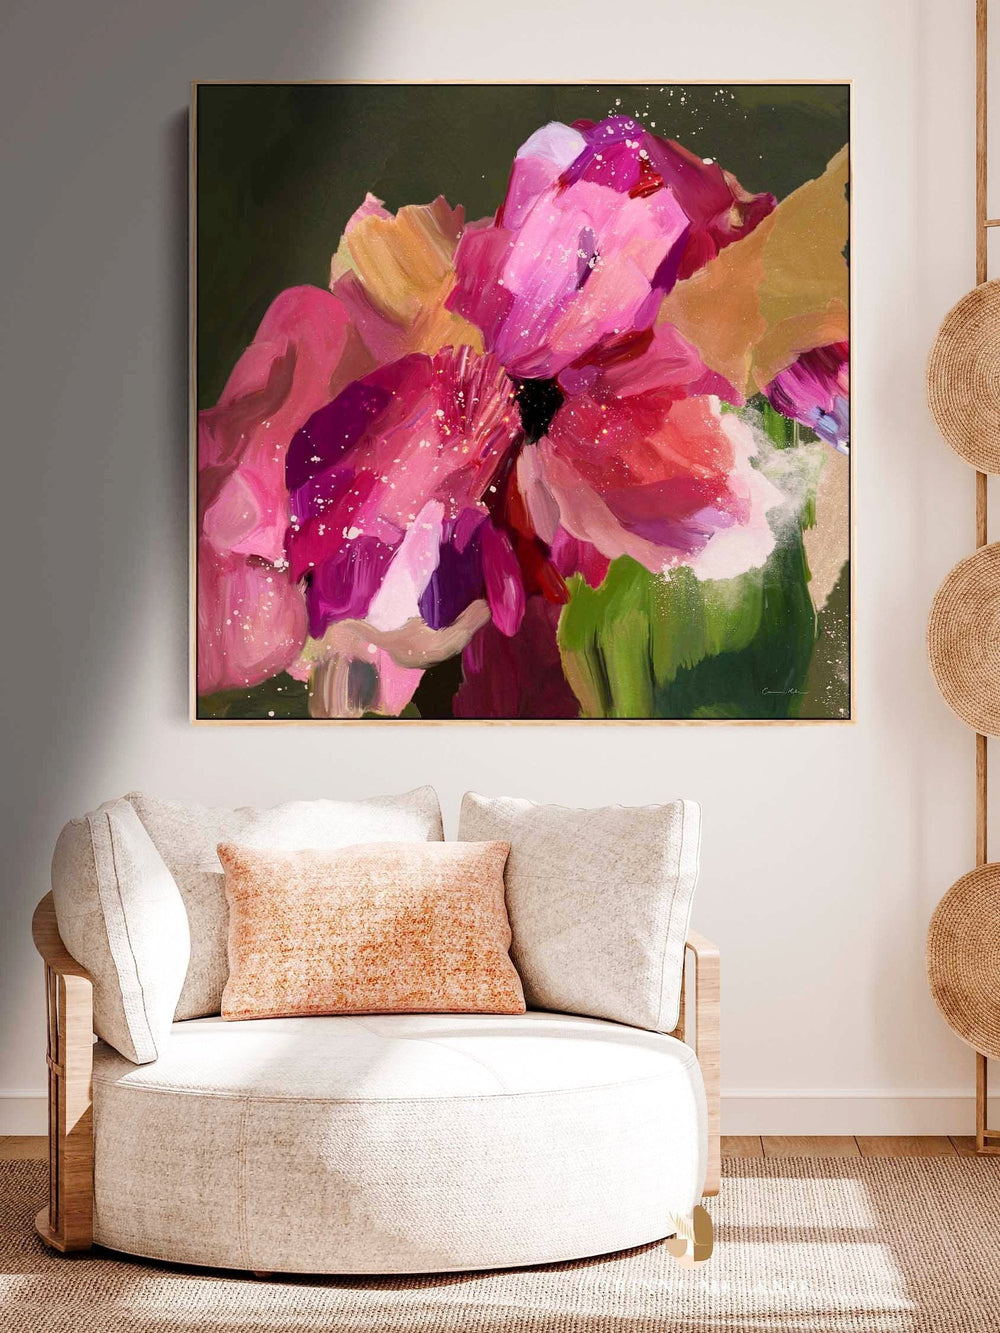 CORINNE MELANIE | Modern Abstract Art | Shop Paintings and Prints